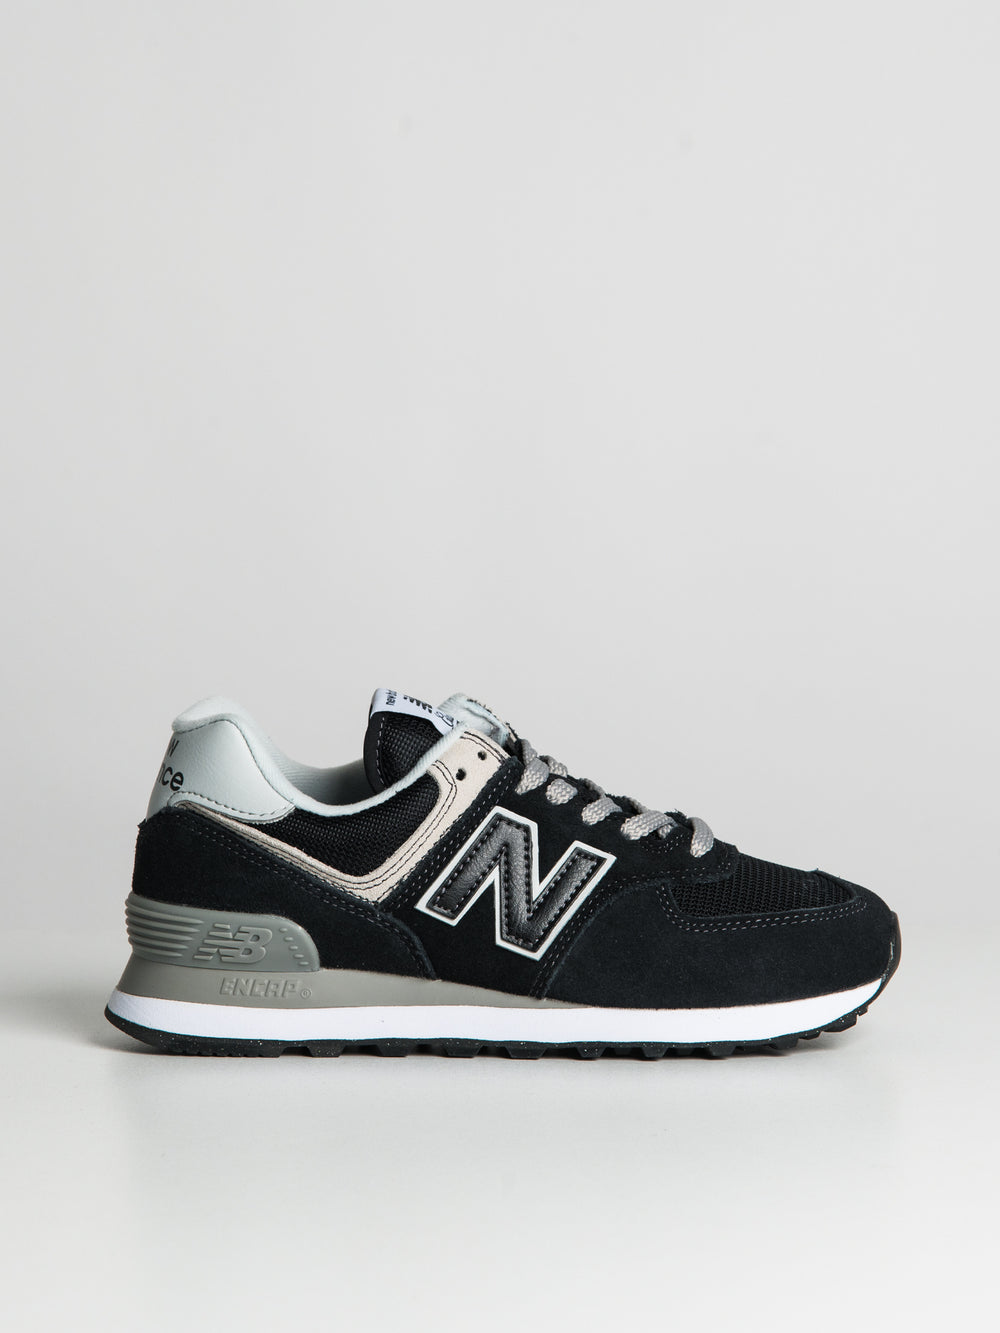 WOMENS NEW BALANCE THE 574 - CLEARANCE